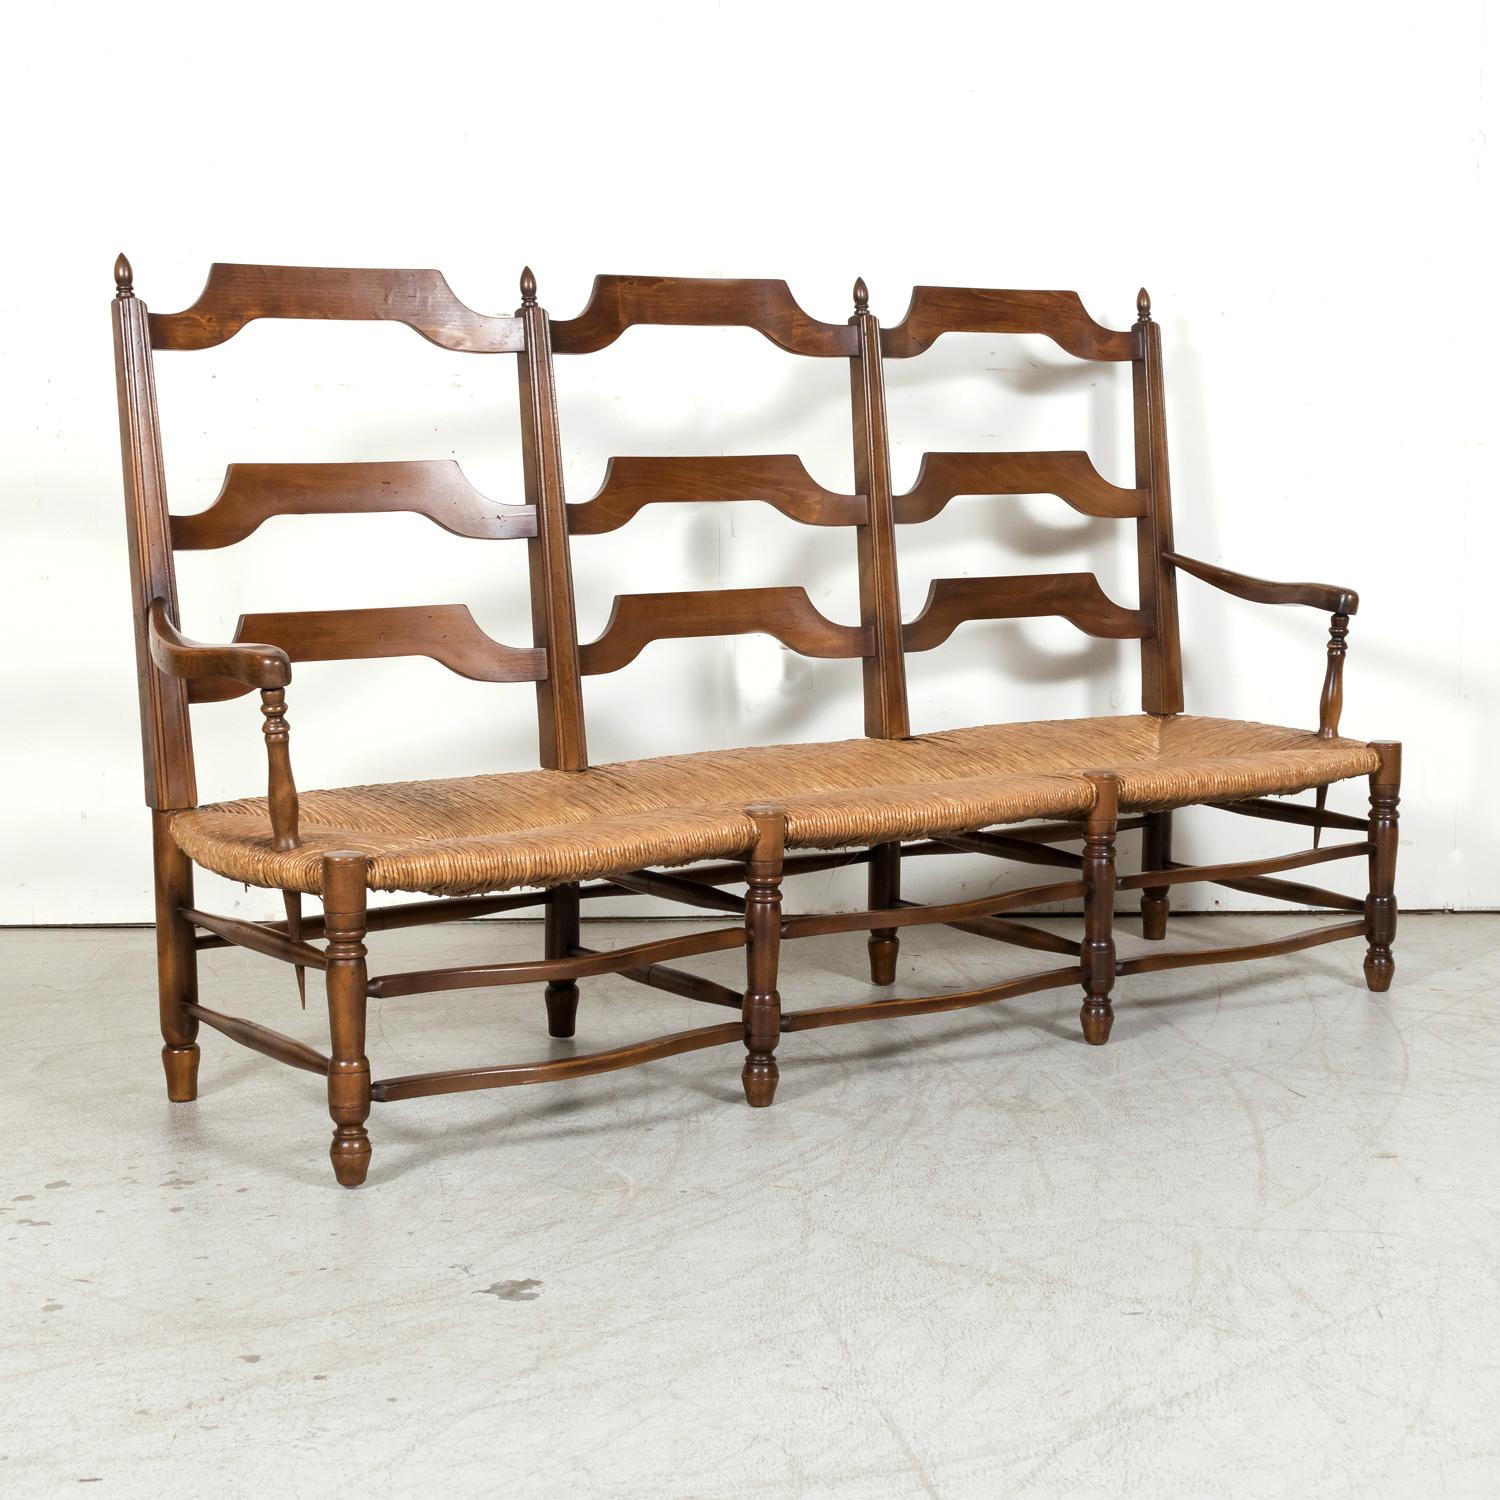 Late 19th Century Antique Country French Walnut Ladder Back Settee or Radassier with Rush Seat For Sale